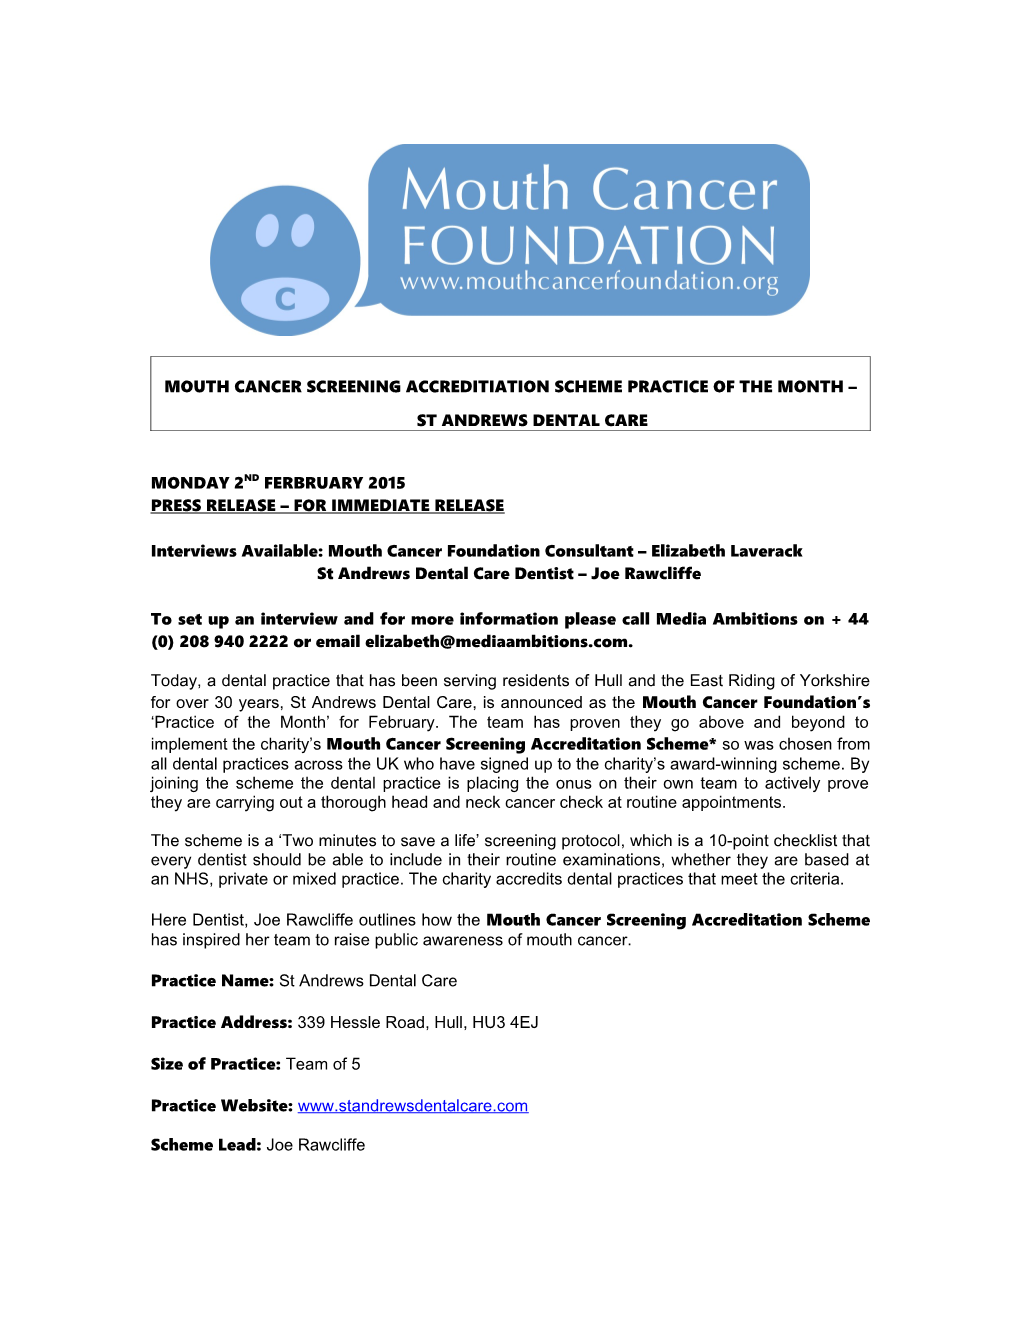 Mouth Cancer Screening Accreditiation Scheme Practice of the Month St Andrews Dental Care